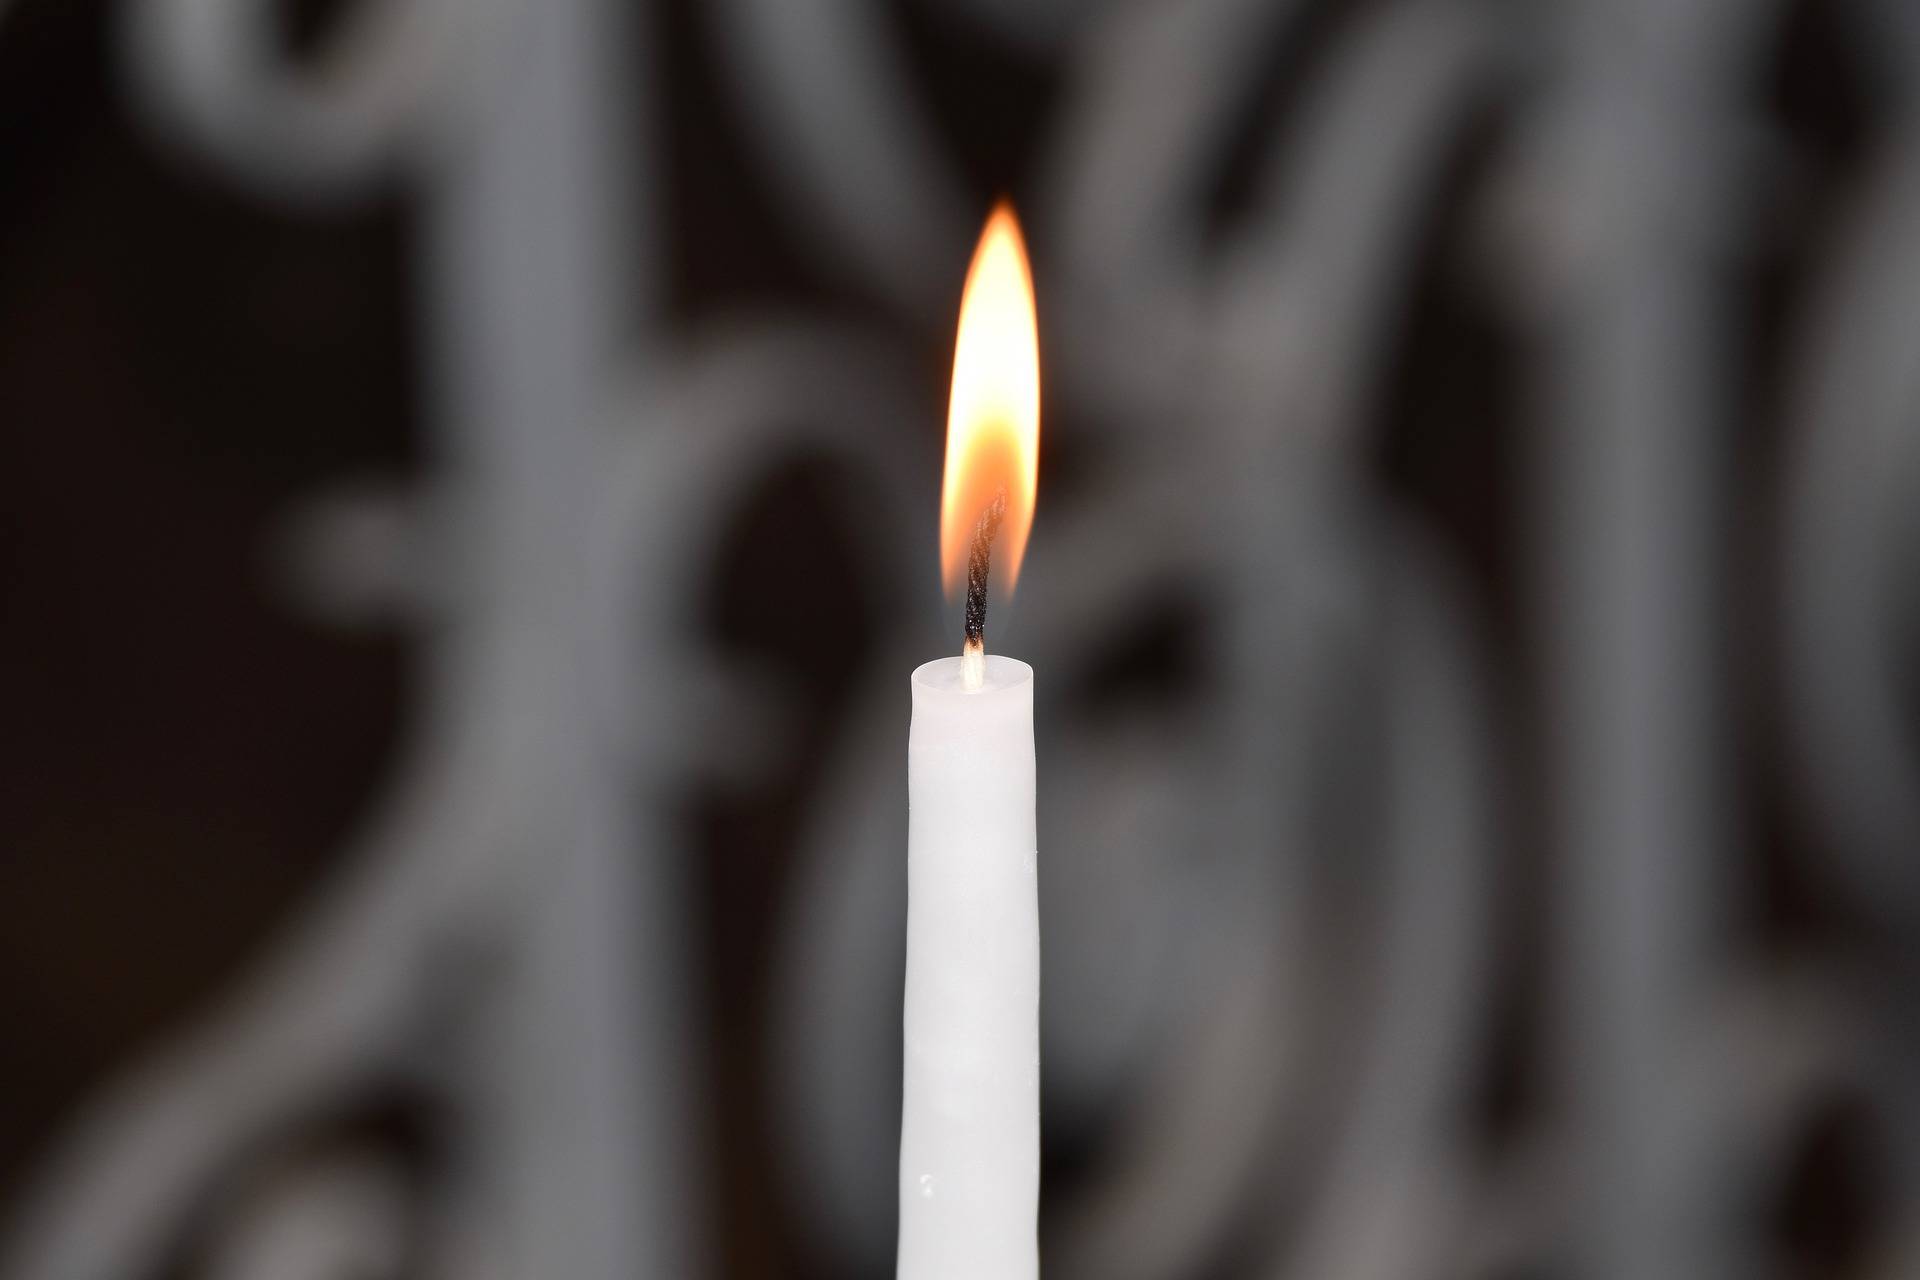 One lit candle